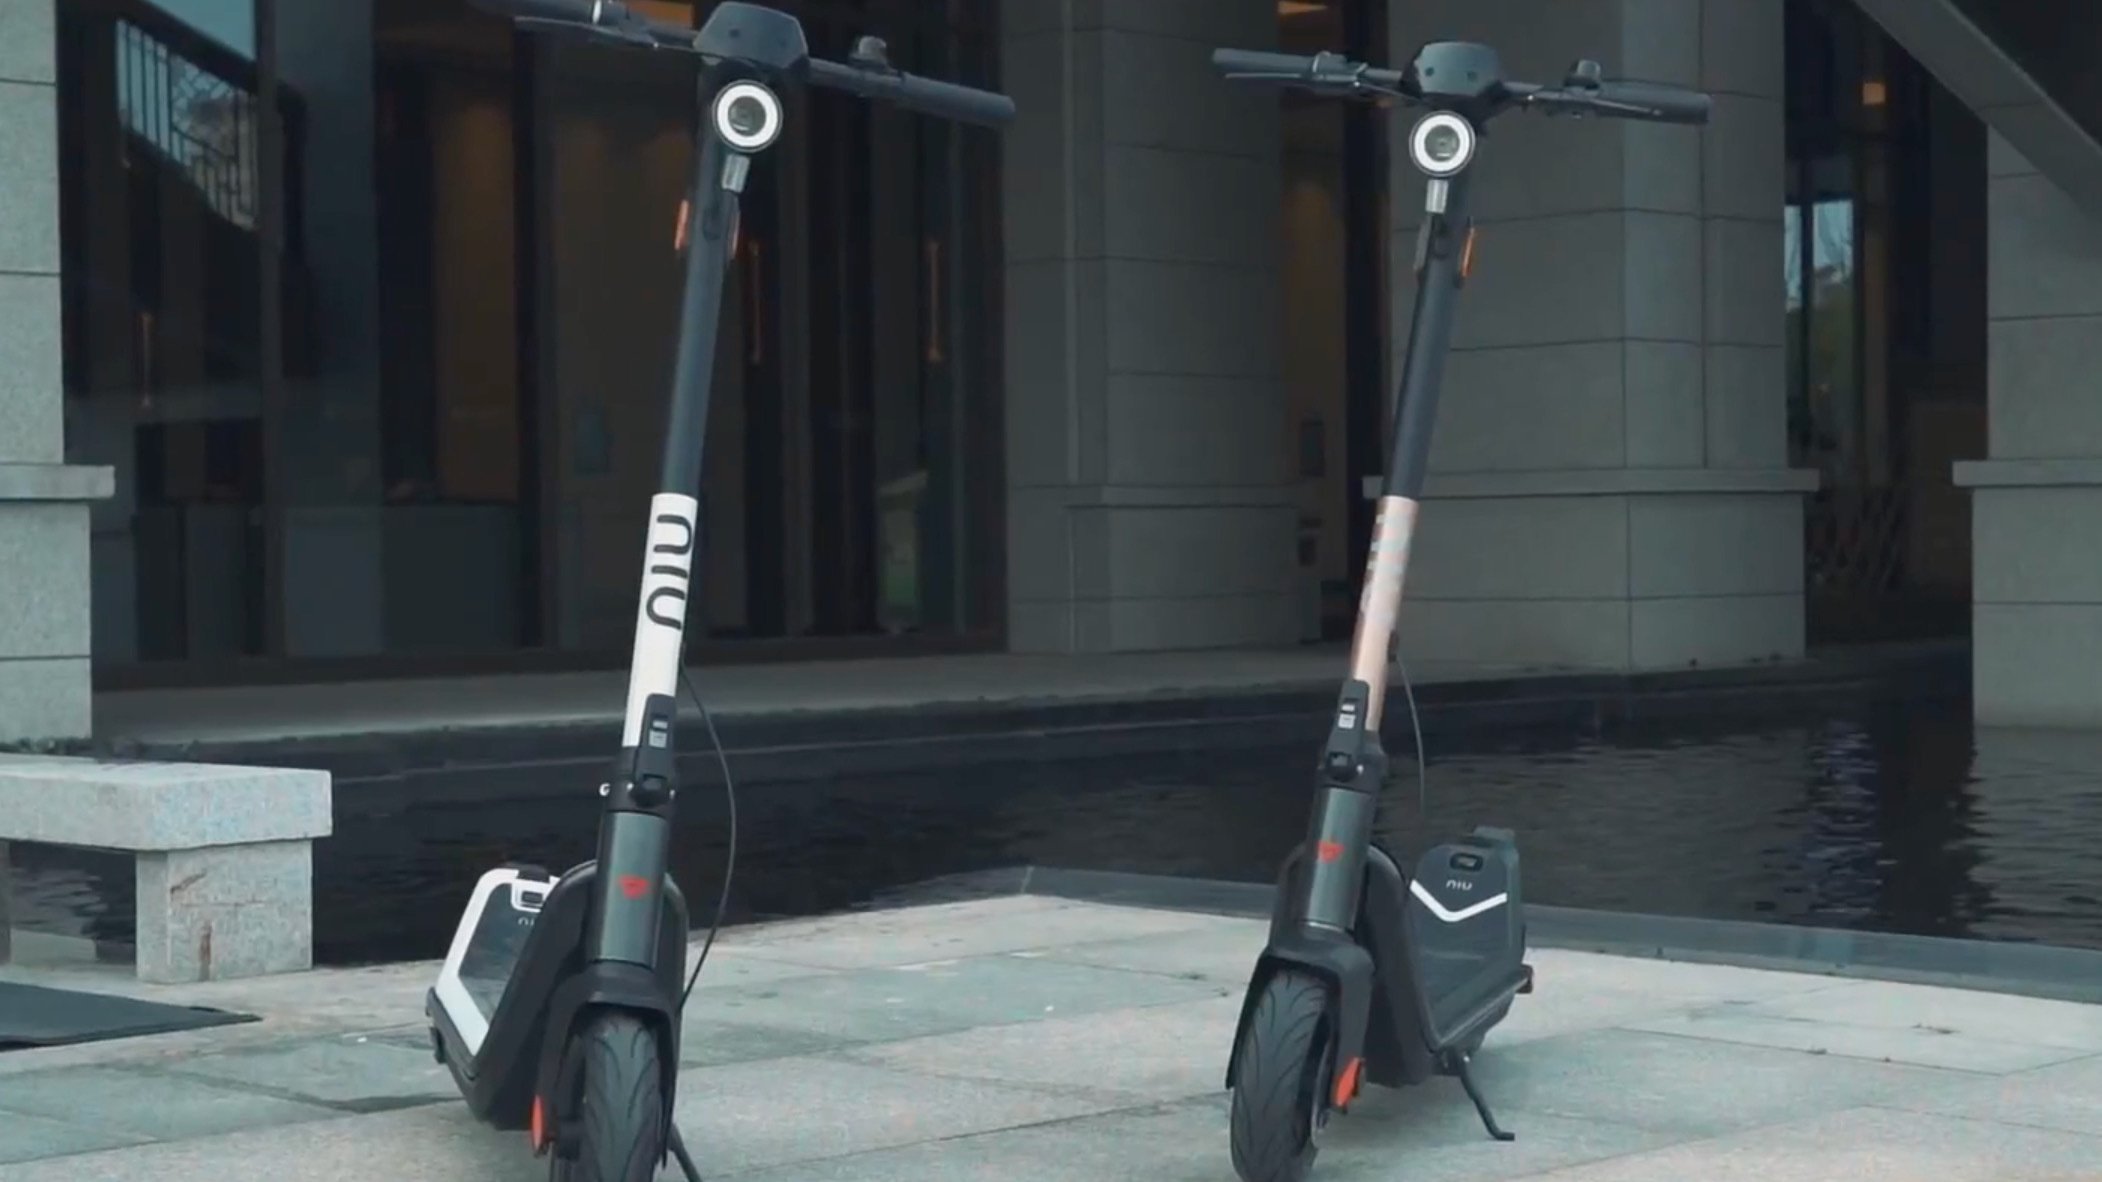 Two electric scooters side by side on pavement